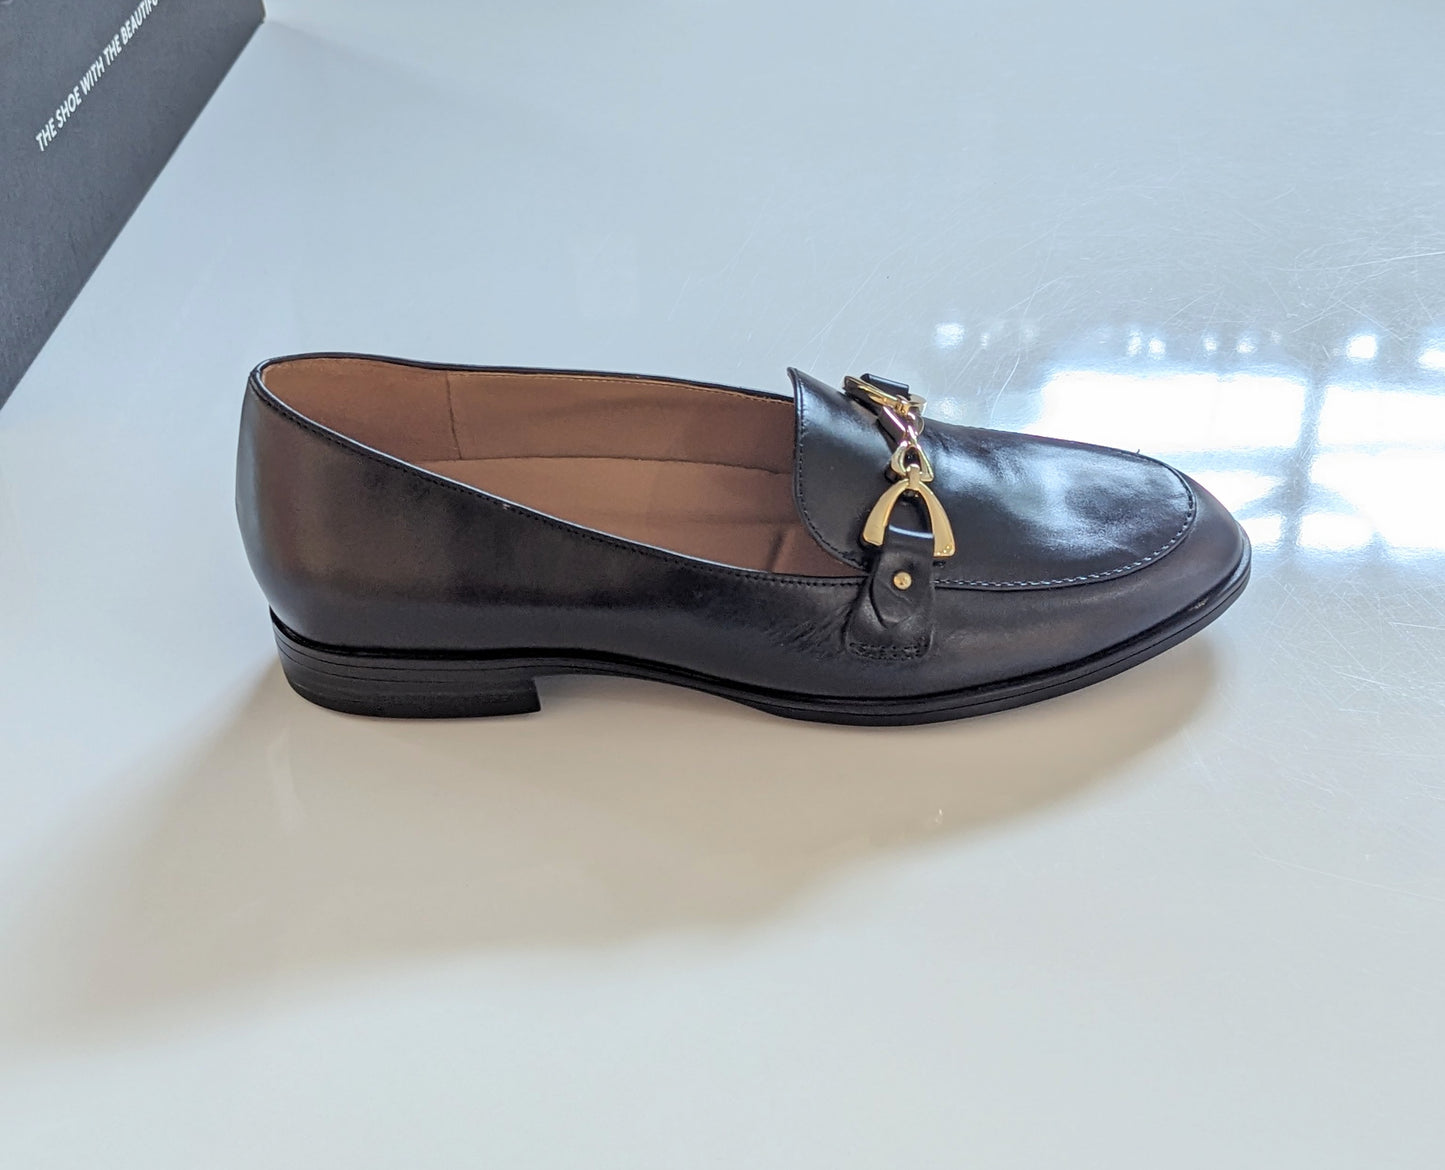 Gala Black Leather Loafer by Naturalizer